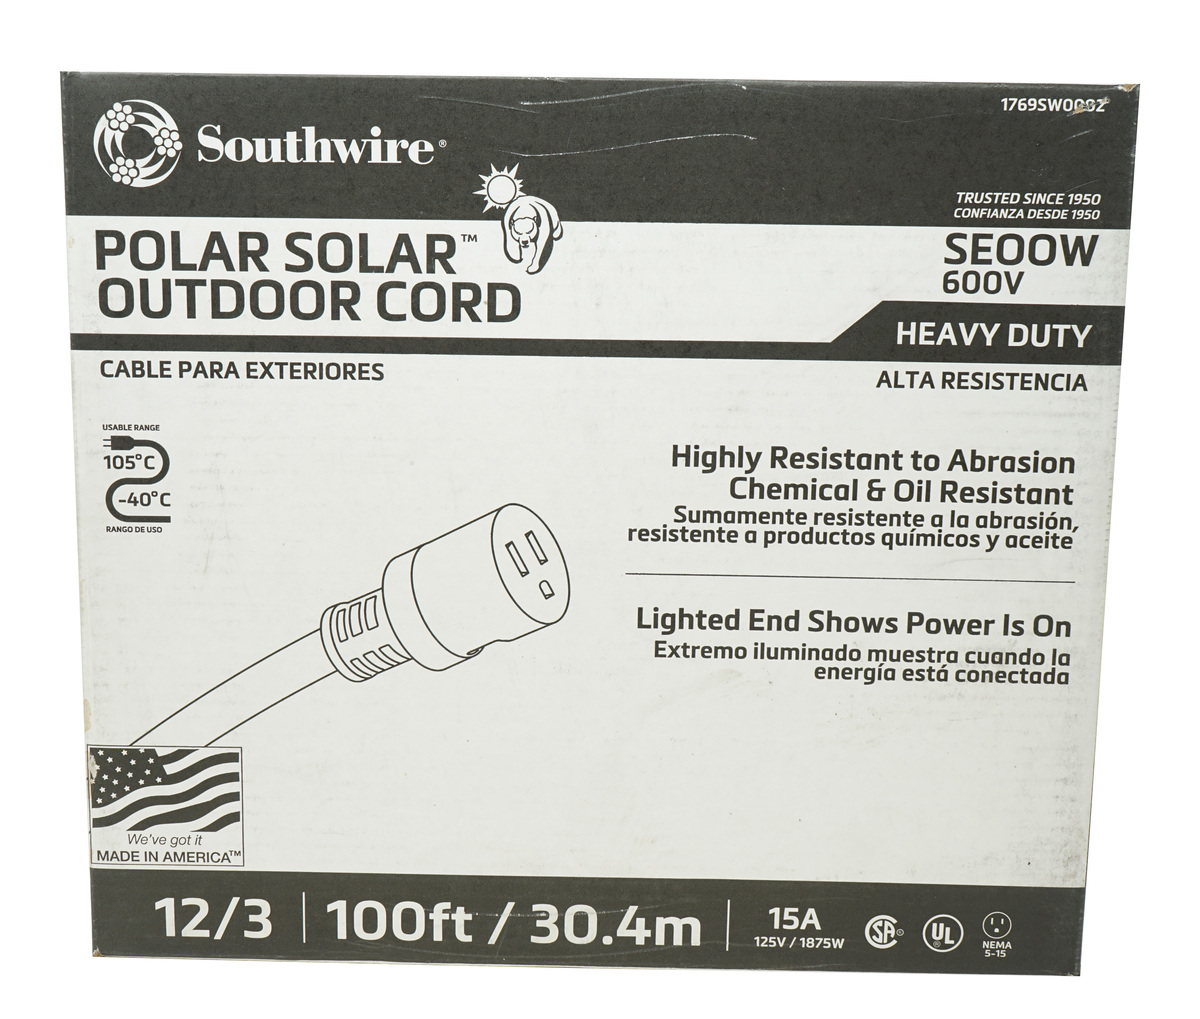 Polar/Solar 1769SW0002 12/3 Heavy-Duty Extra Hard Usage 15-Amp SEOOW Cold Weather Extension Cord, 1000-Feet